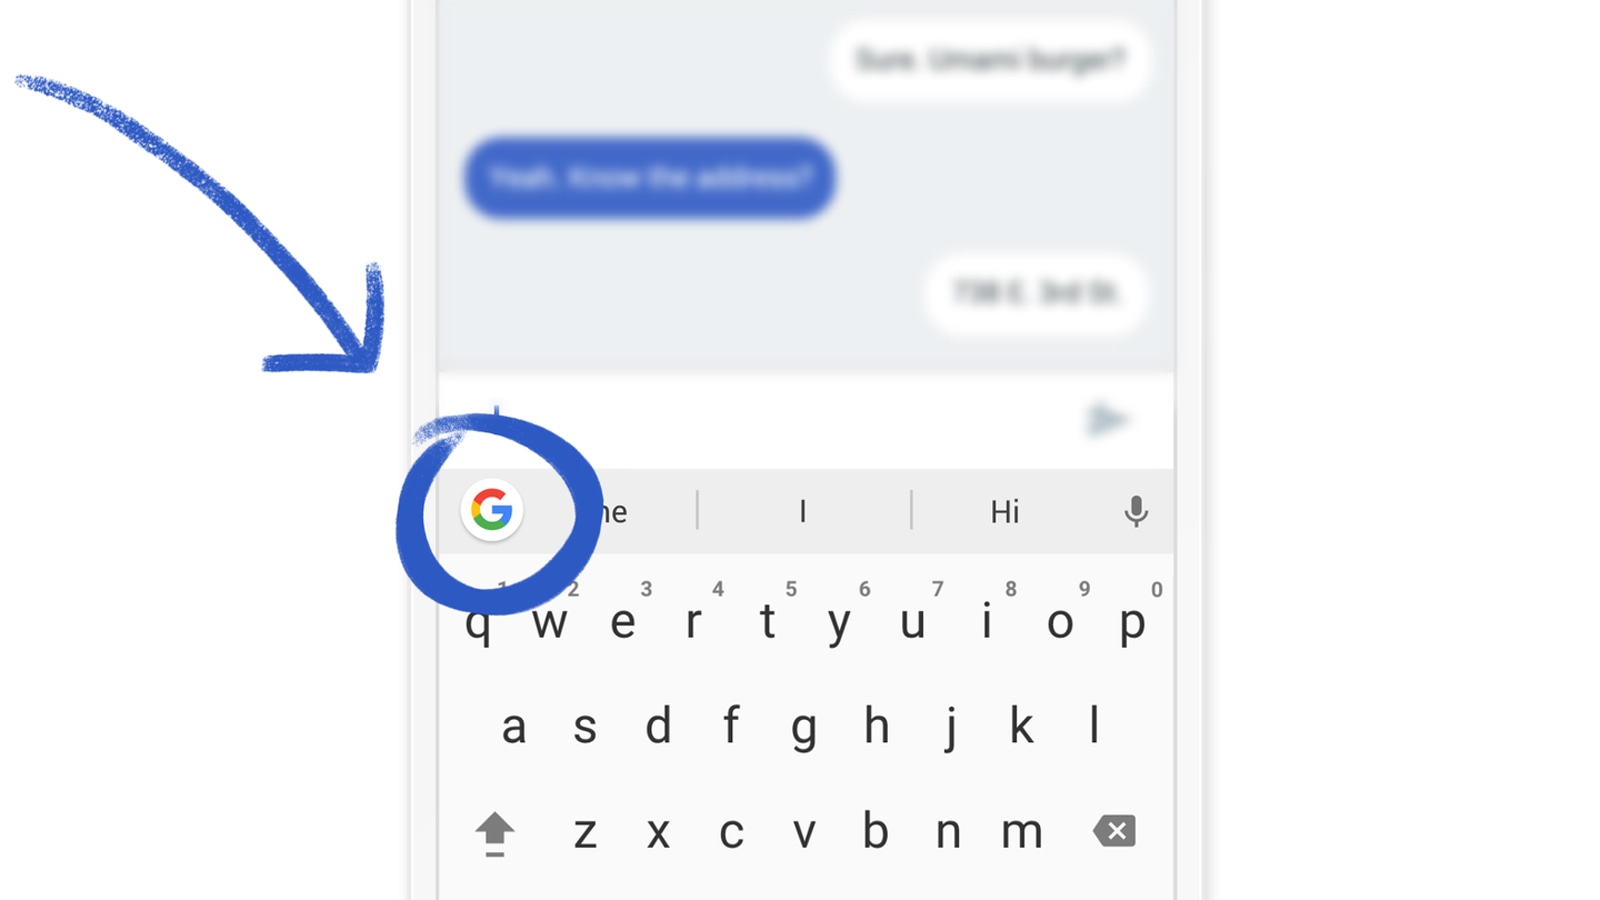 Gboard on Android makes it easier to type and tweak your text